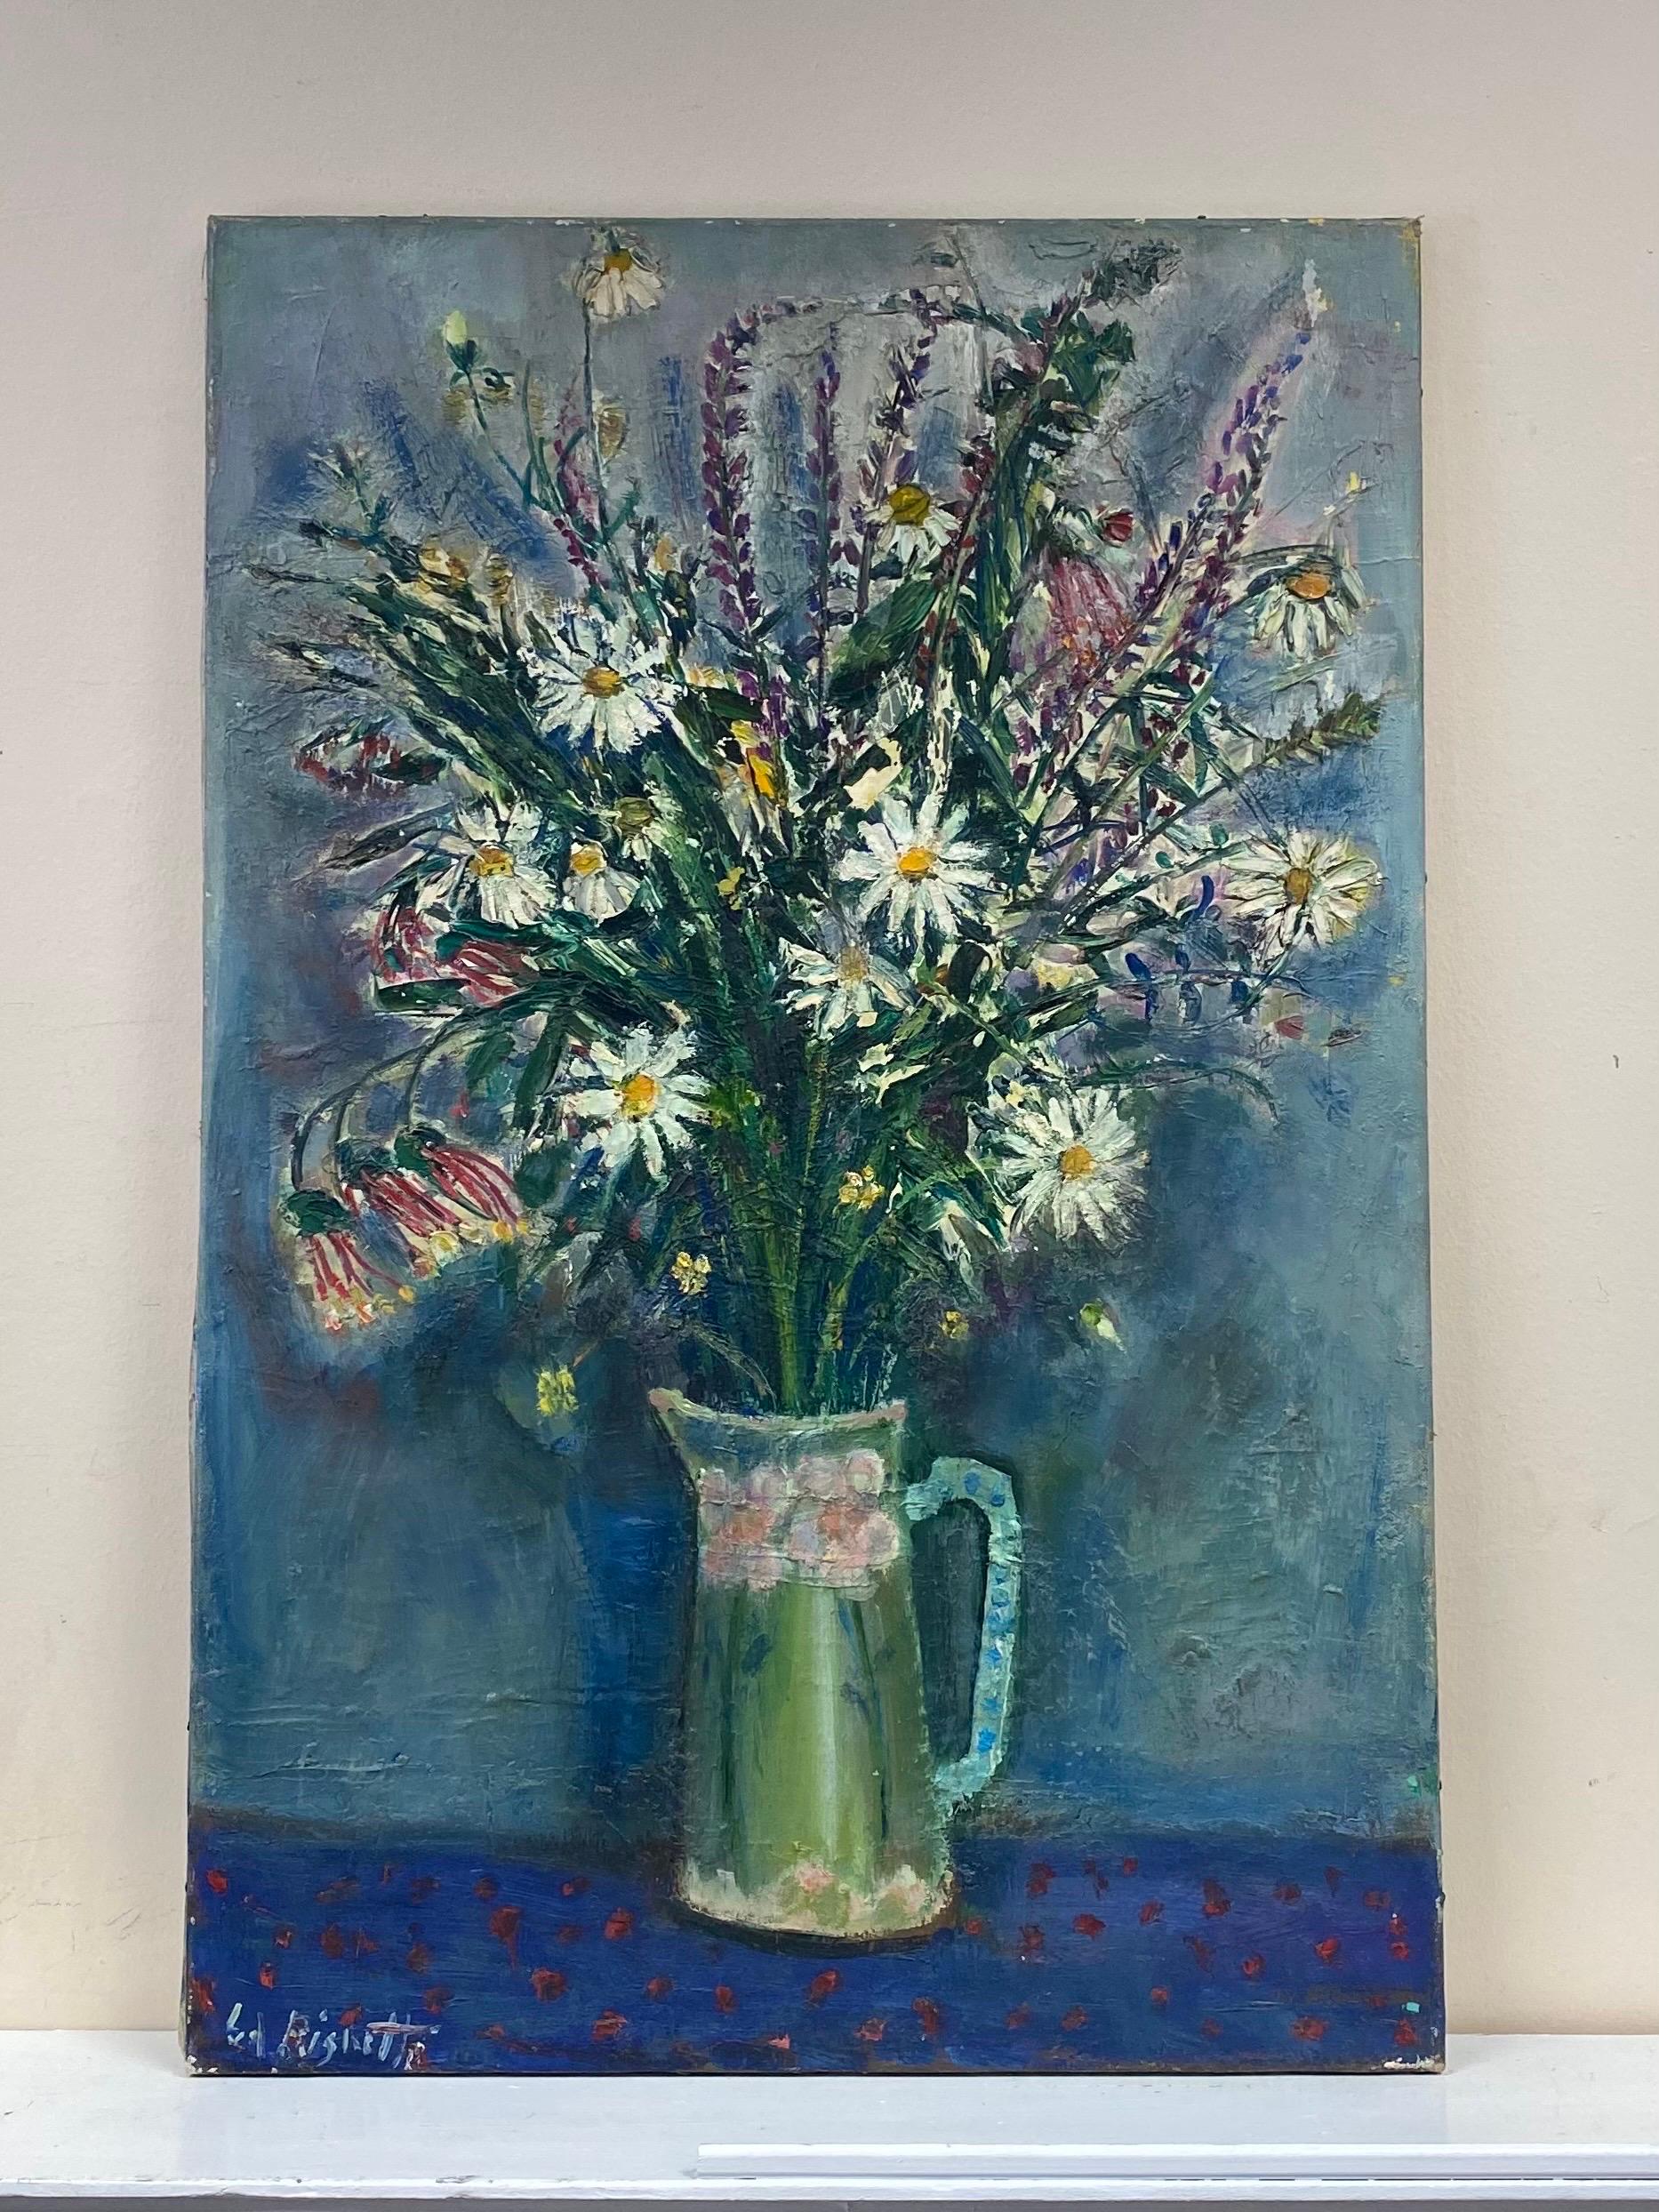 Large 1950's French Post-Impressionist Signed Oil - Bright Flowers Green & Blue - Painting by Édouard Righetti (1924-2001)